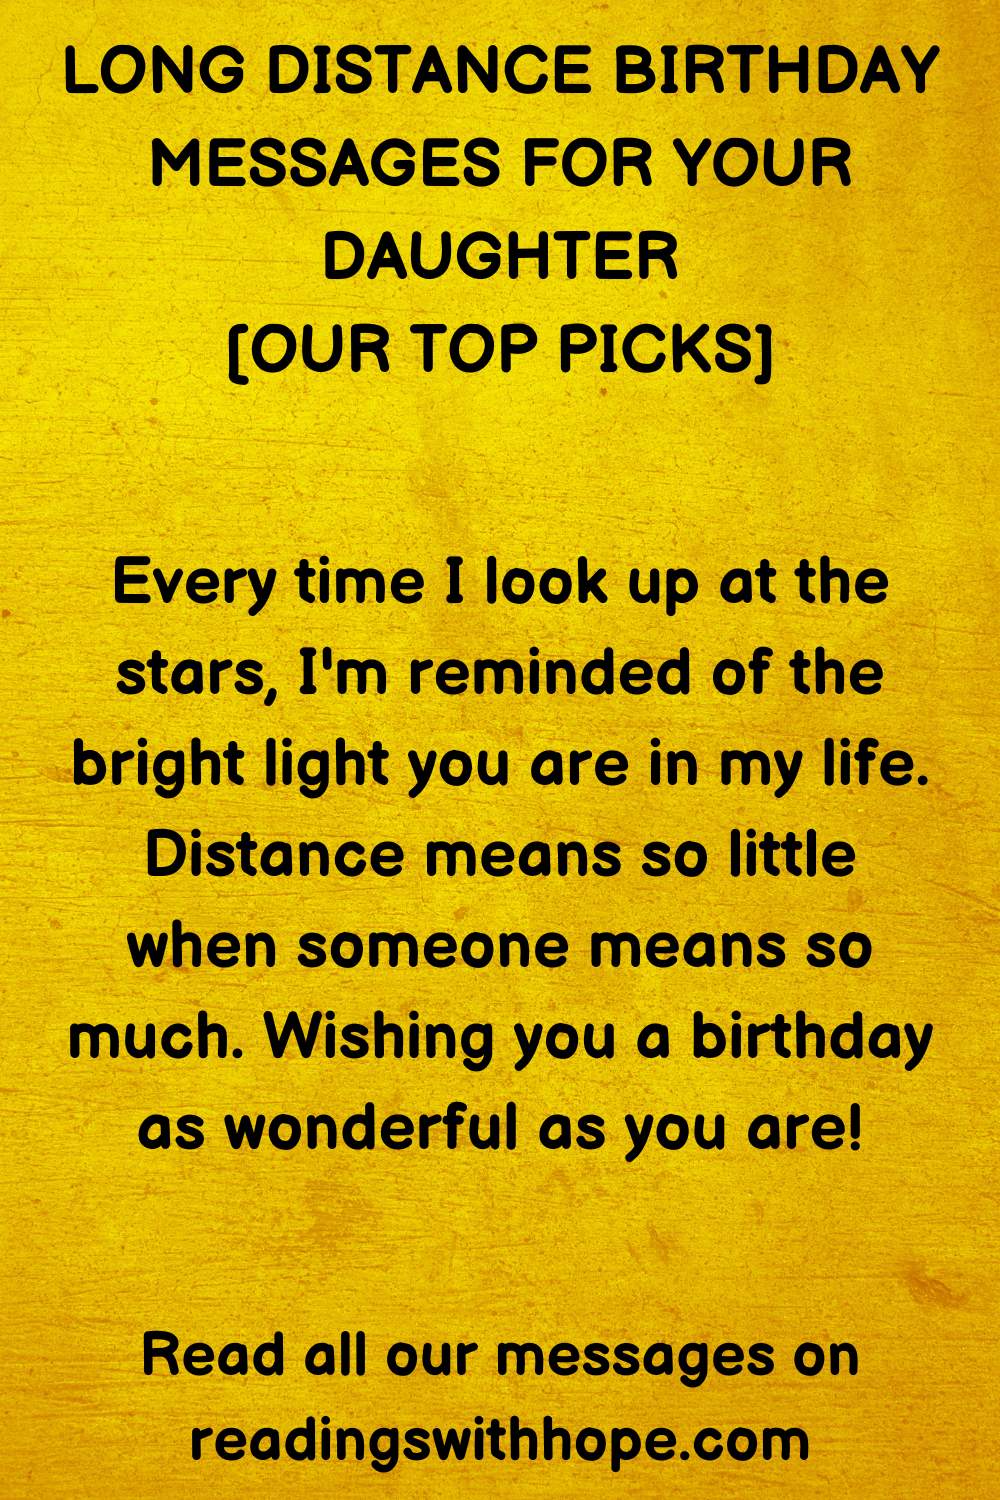 Long Distance Birthday Message for Your Daughter 1